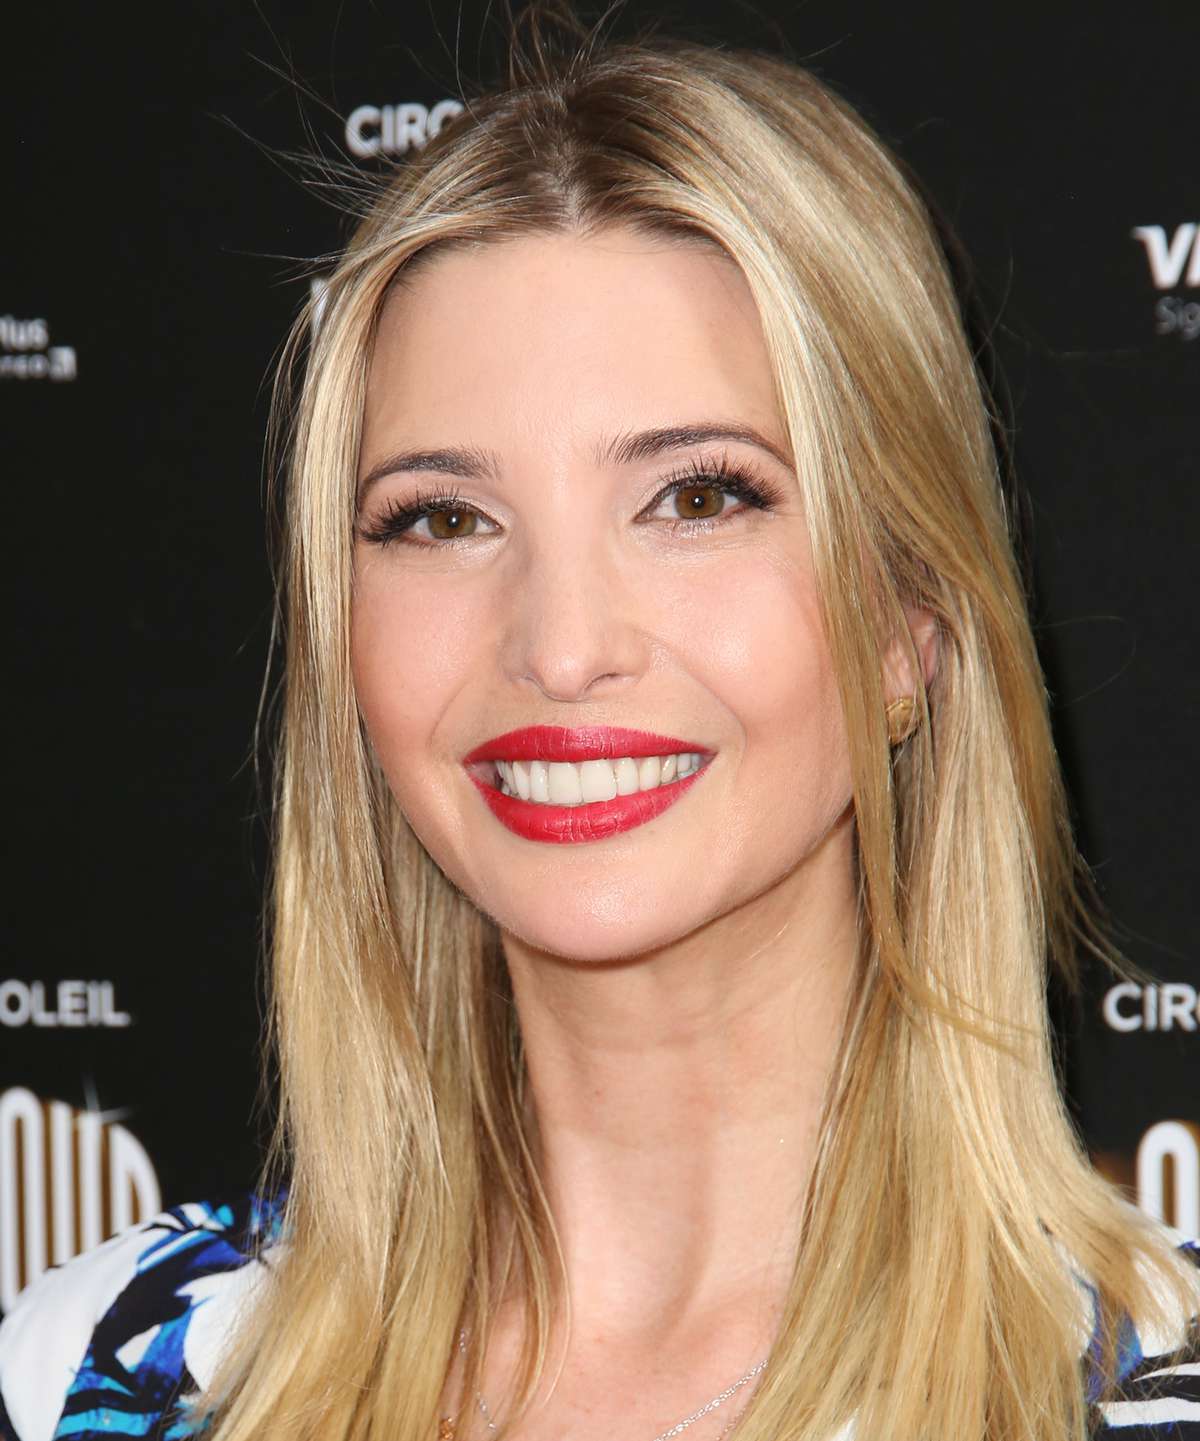 Ivanka Trump attends the Broadway Opening Night performance of 'Cirque Du Soliel's PARAMOUR' at the Lyric Theatre on May 19, 2016 in New York City.